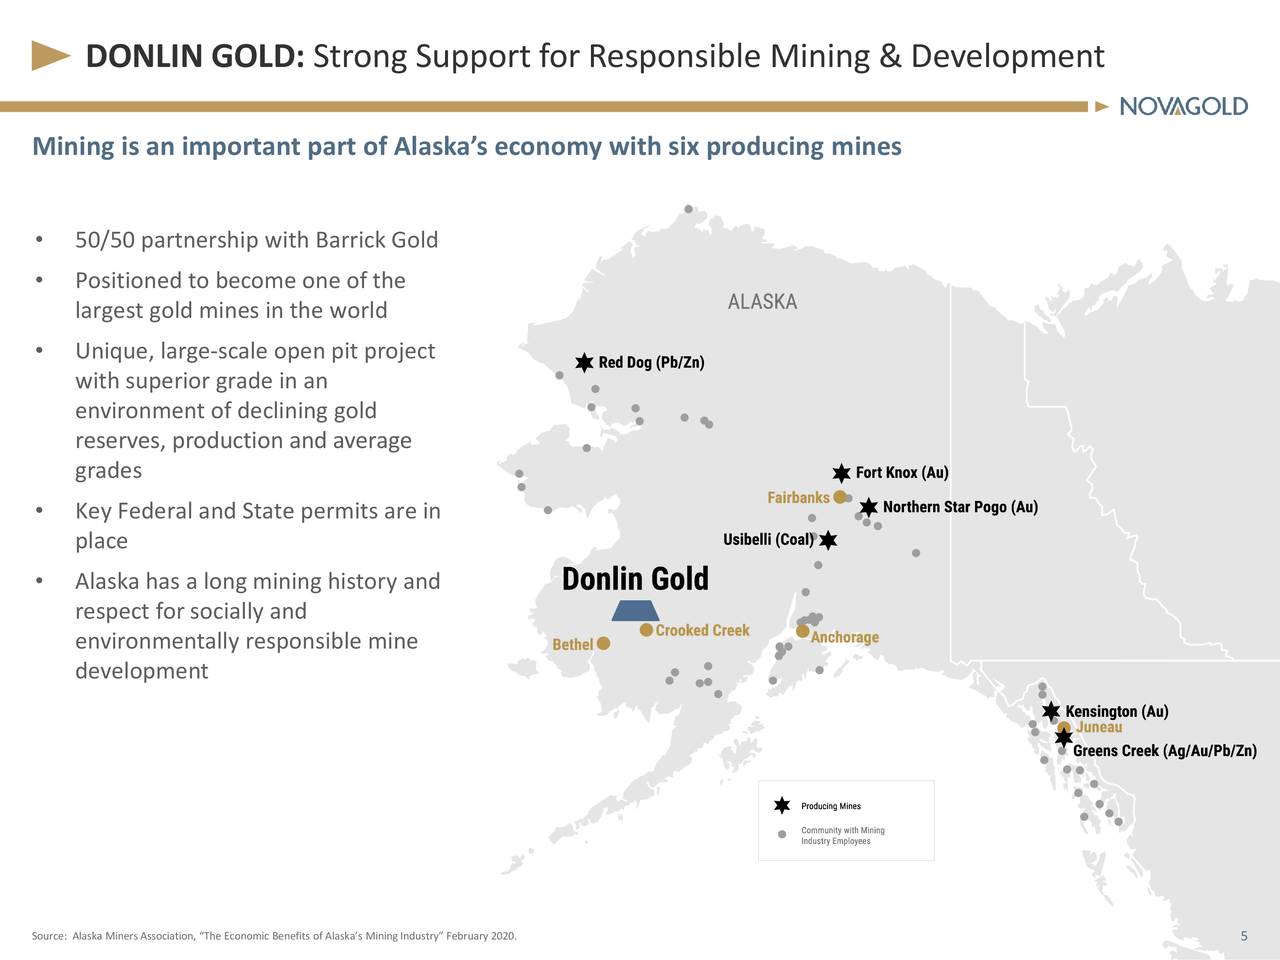 DONLIN GOLD: Strong Support for Responsible Mining & Development